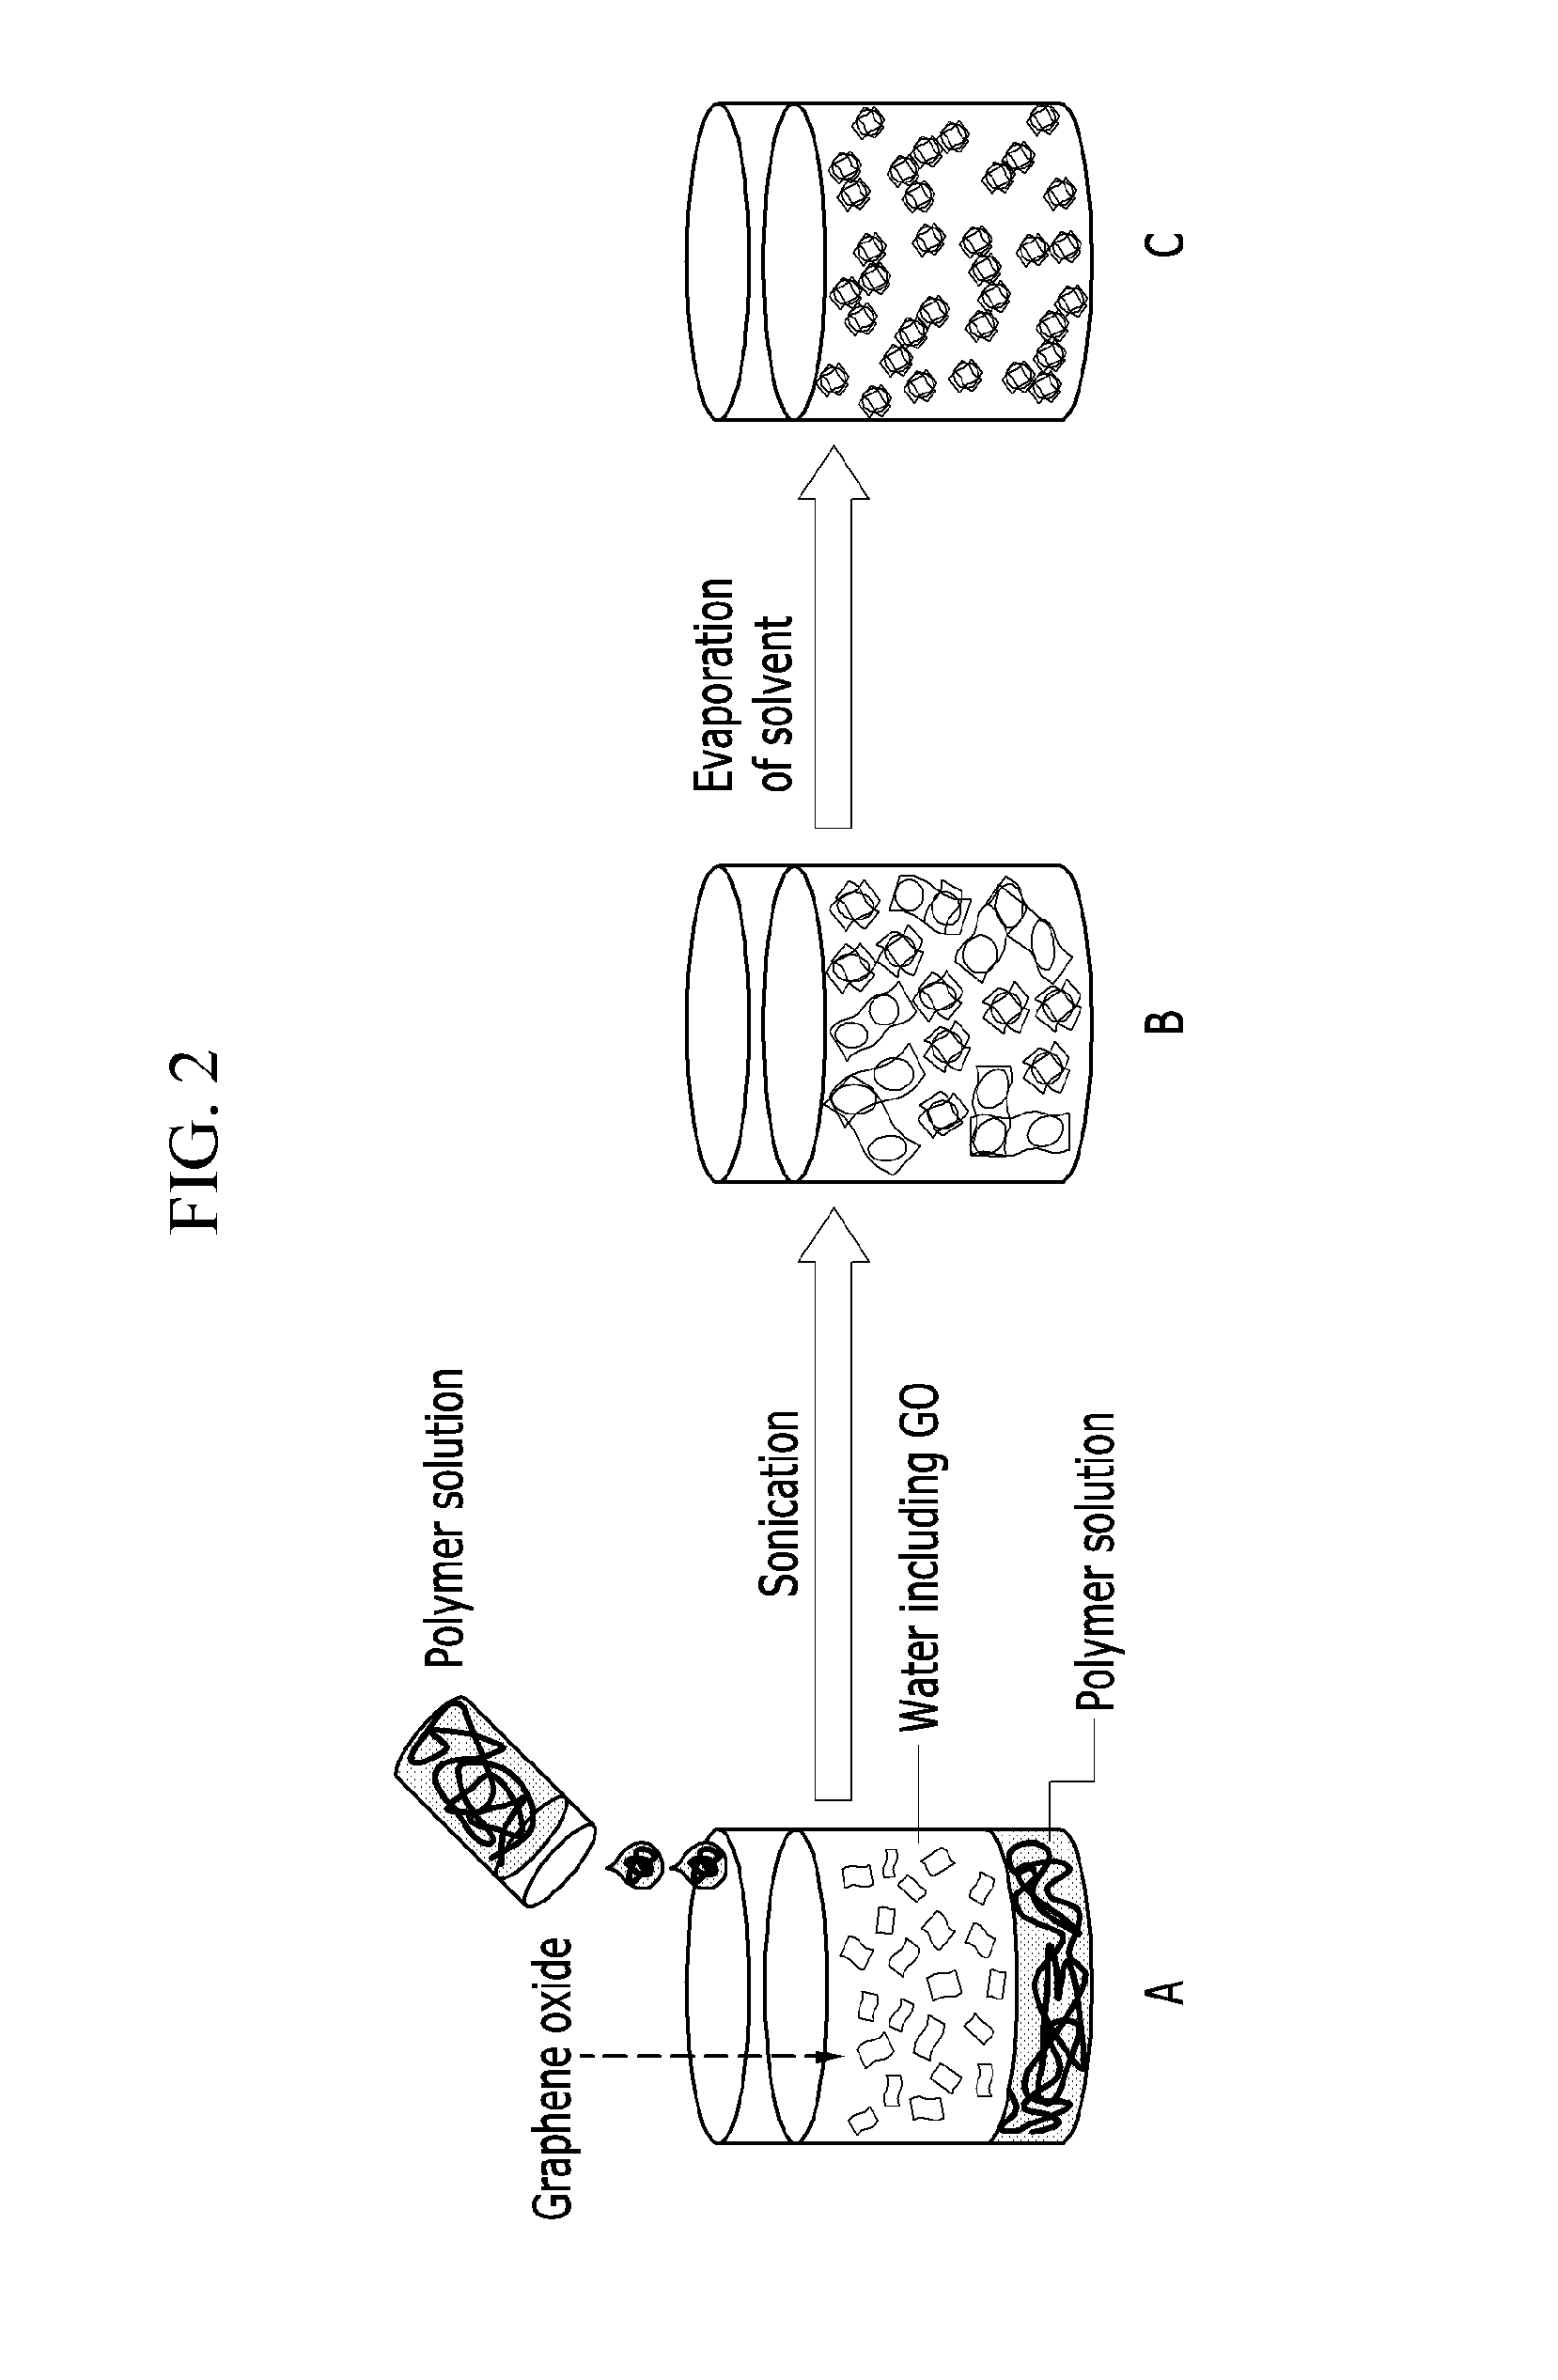 Nanoparticles, method of manufacturing nanoparticles, and electronic device including the same